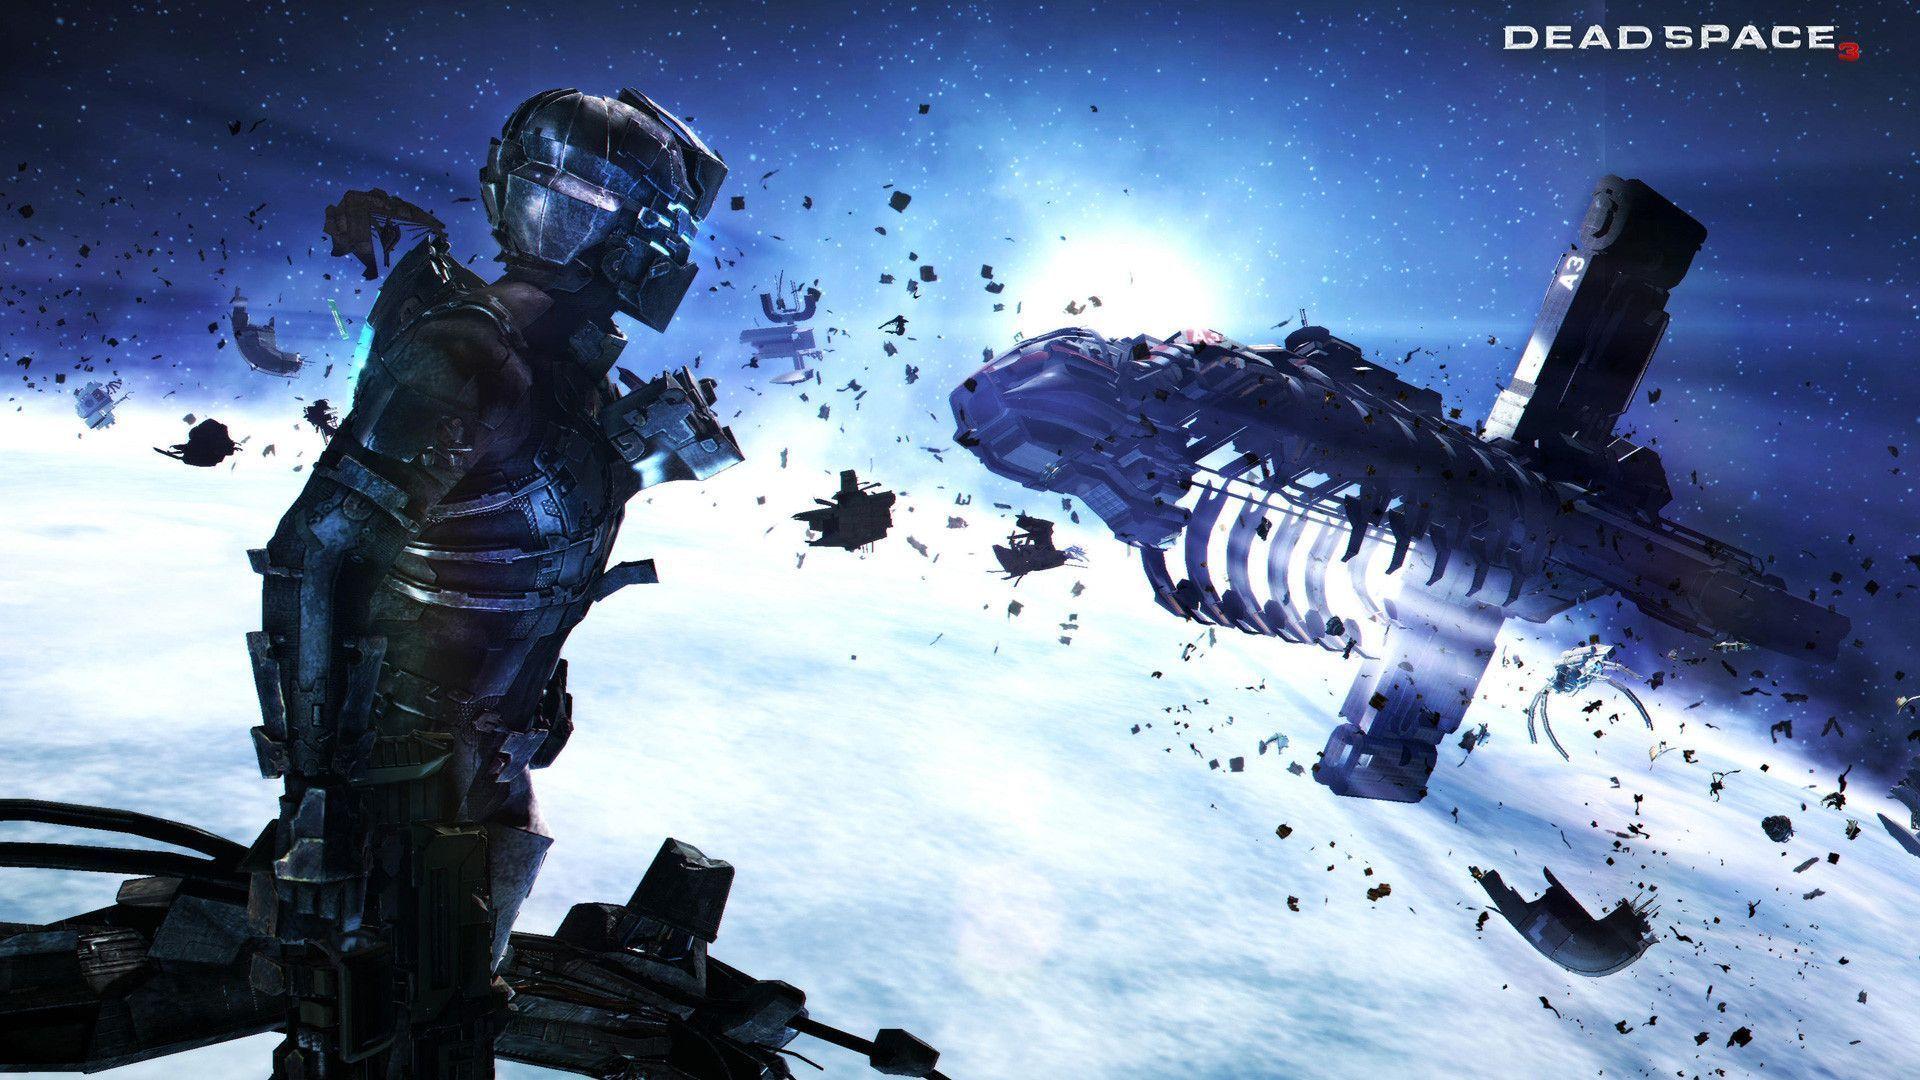 Dead Space 2 Wallpapers HD - Wallpaper Cave